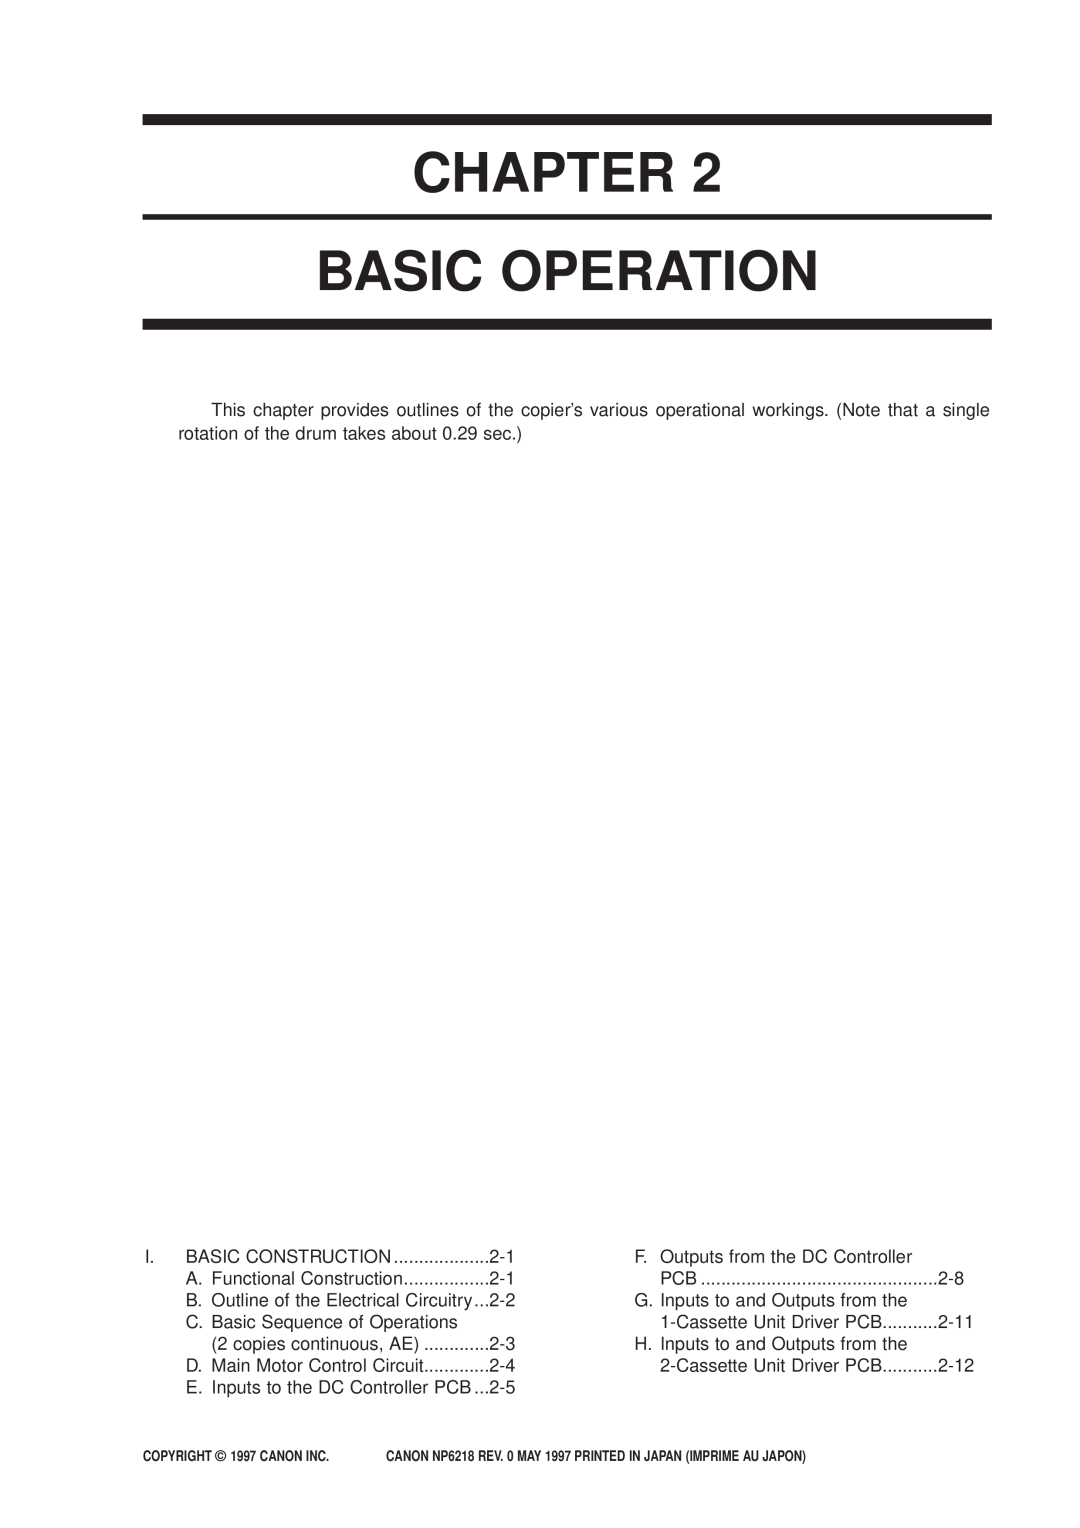 Canon NP6218, FY8-13EX-000 service manual Chapter Basic Operation 